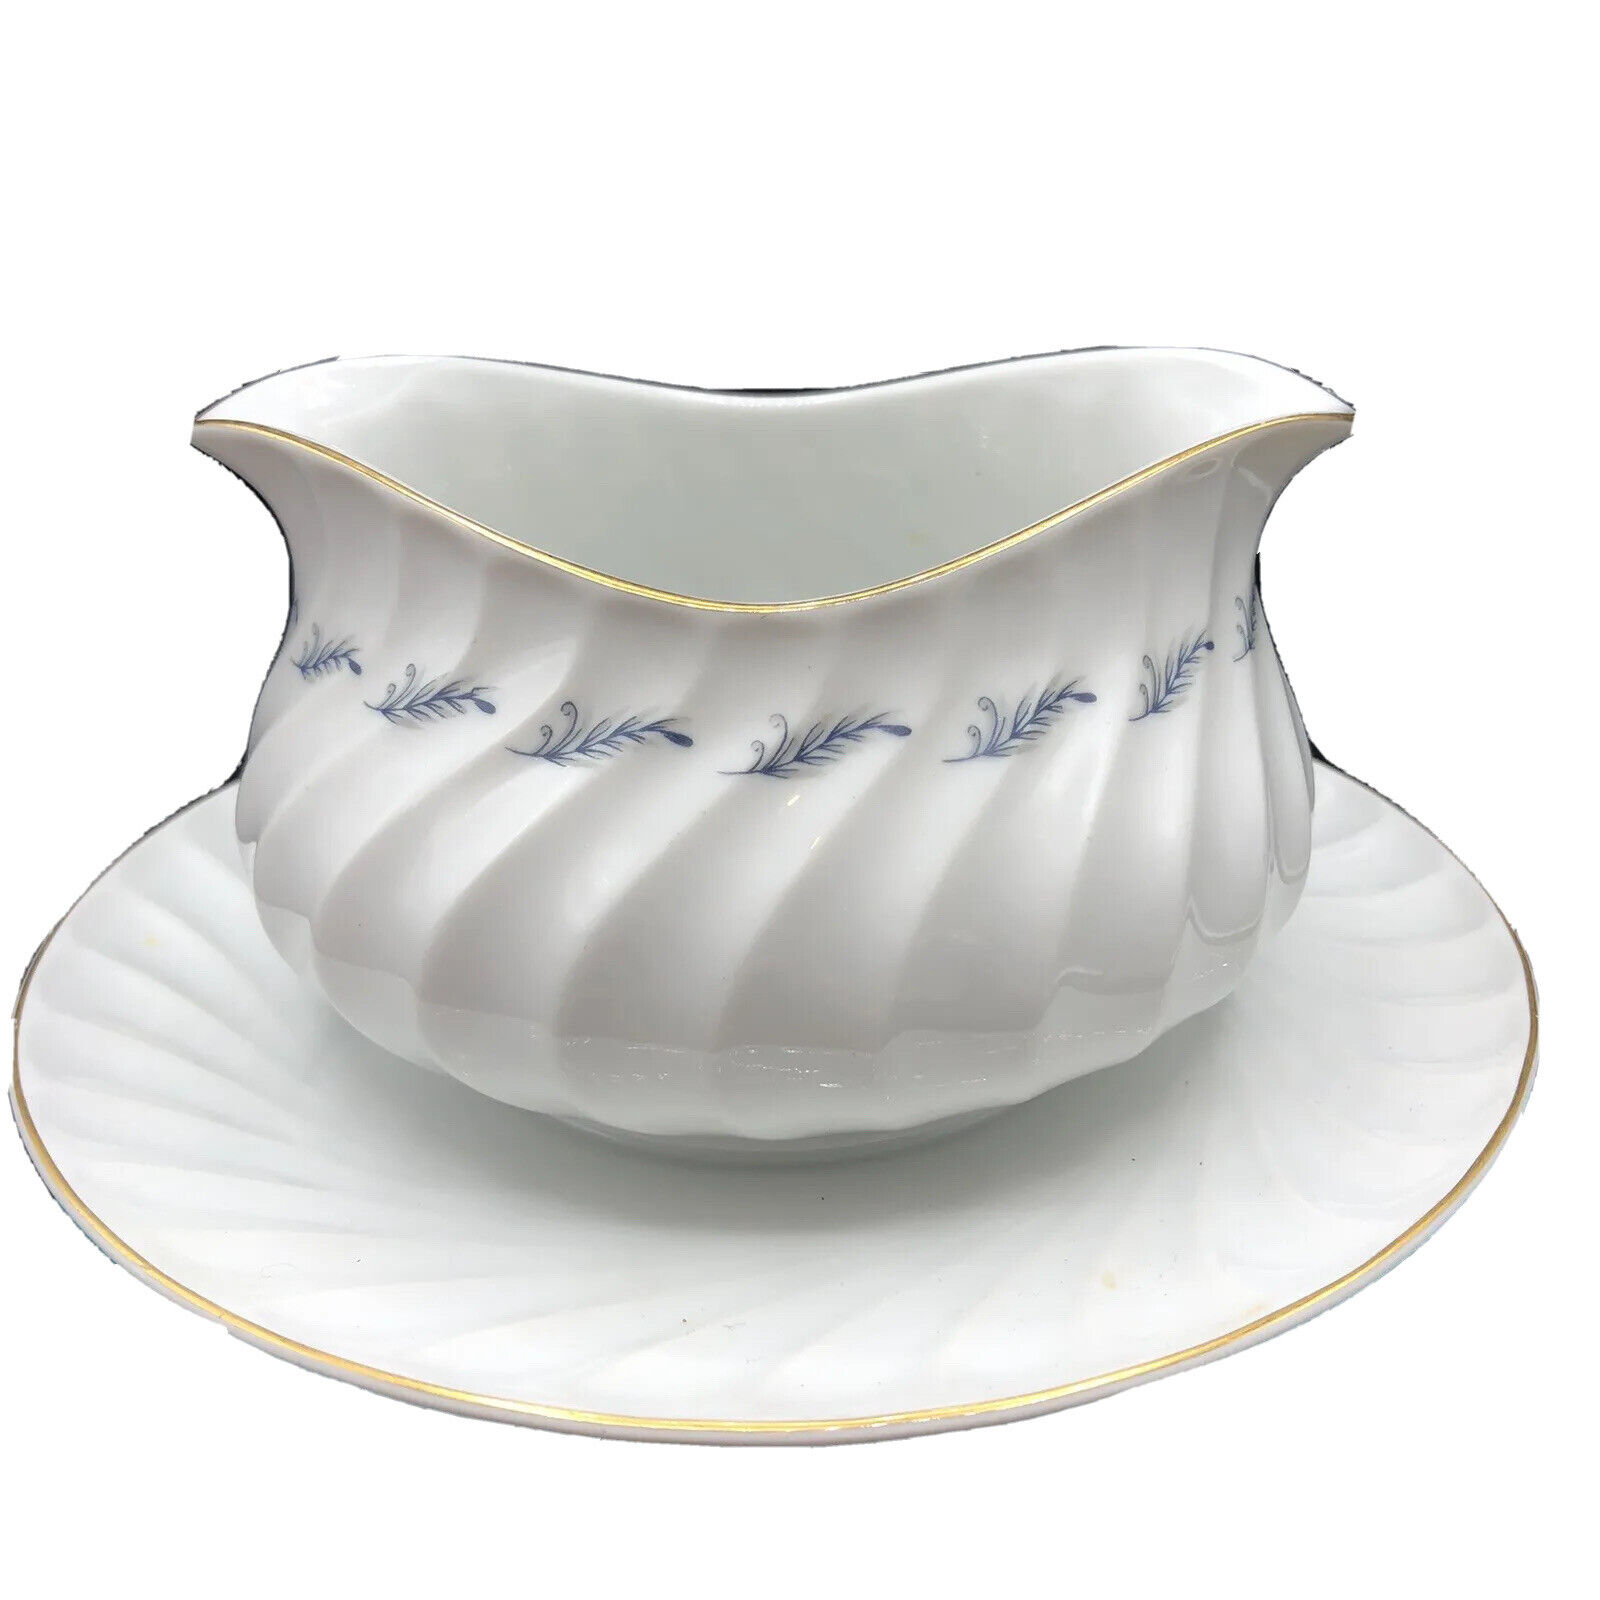 Meito China Gravy Boat With Attached Underplate Cheese Sauce Diana Fun